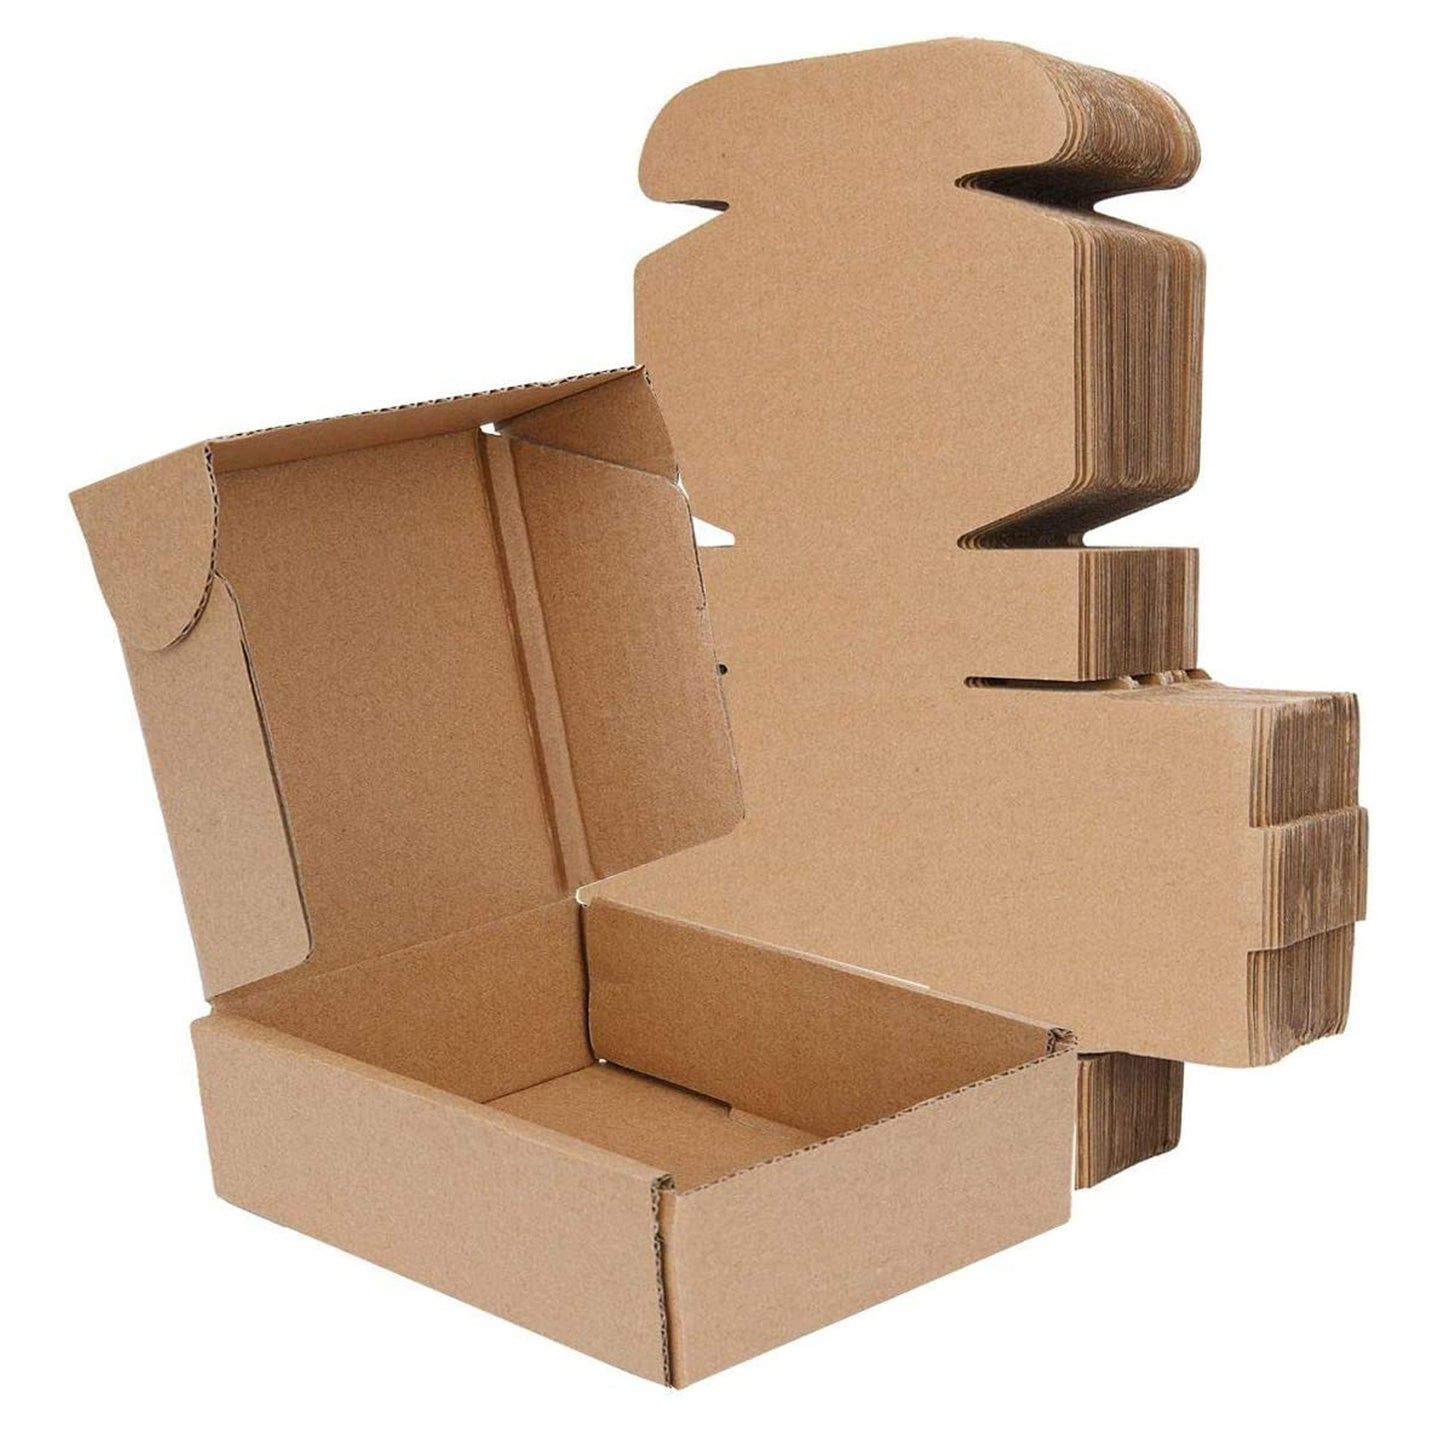 Selection Of Strong Single Wall Die Cut Packing Shipping Boxes